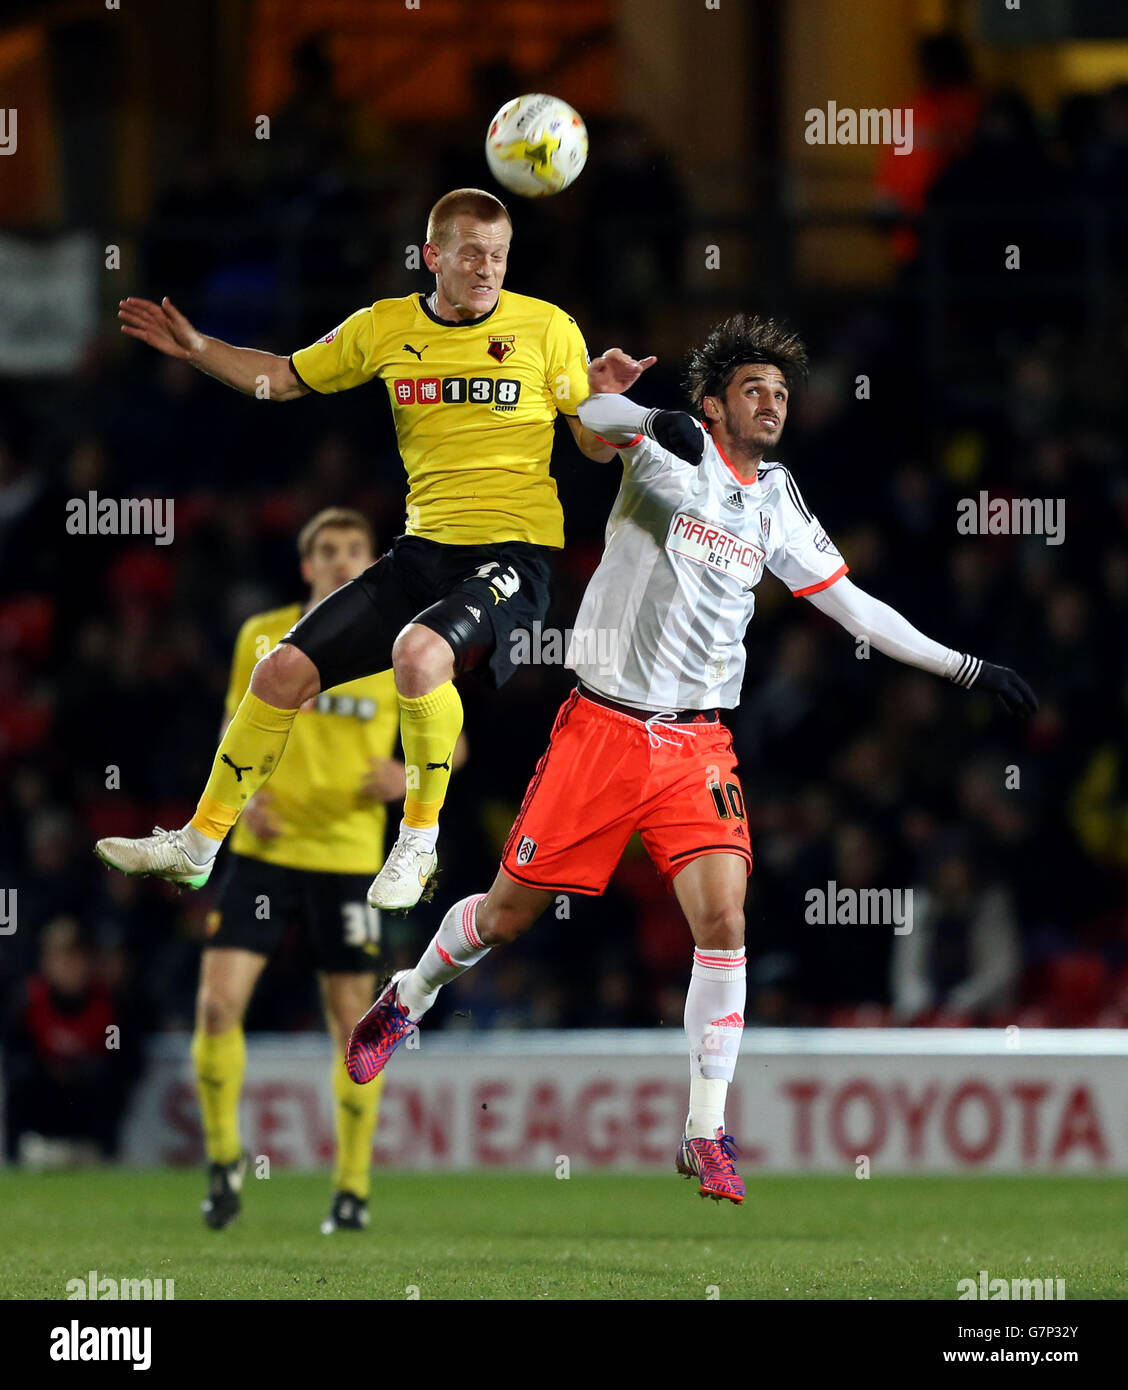 Soccer - Sky Bet Championship - Watford v Fulham - Vicarage Road. Watford's Ben Watson (right) and Fulham's Bryan Ruiz battle for the ball Stock Photo